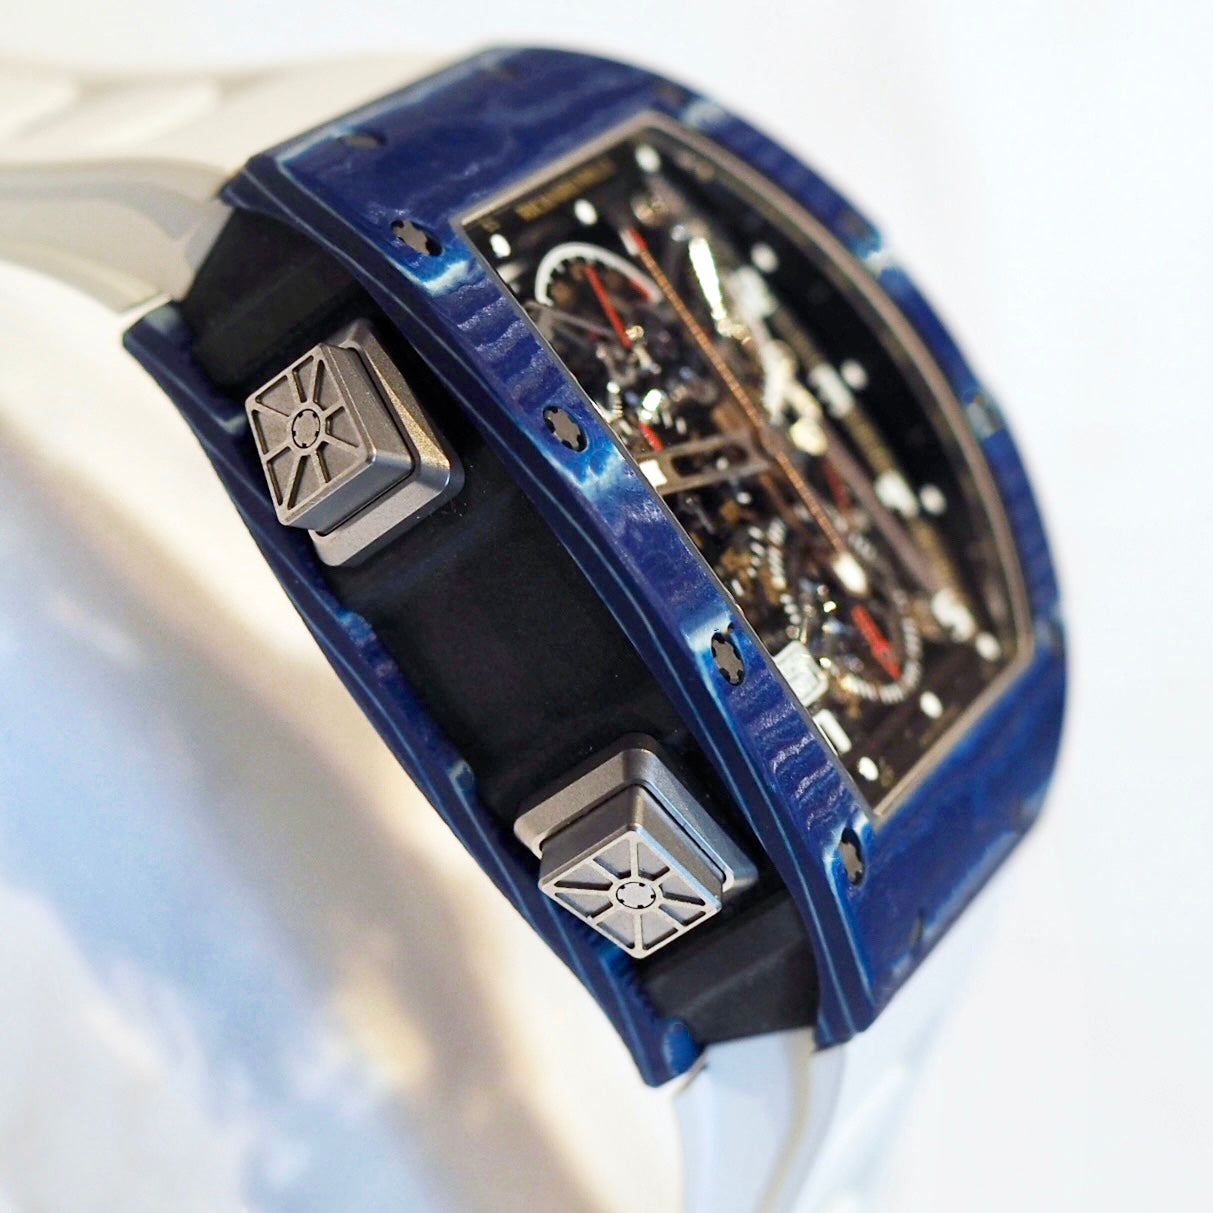 RM050 Jean Todt 50th Anniversary  Richard Mille - 株式会社アート